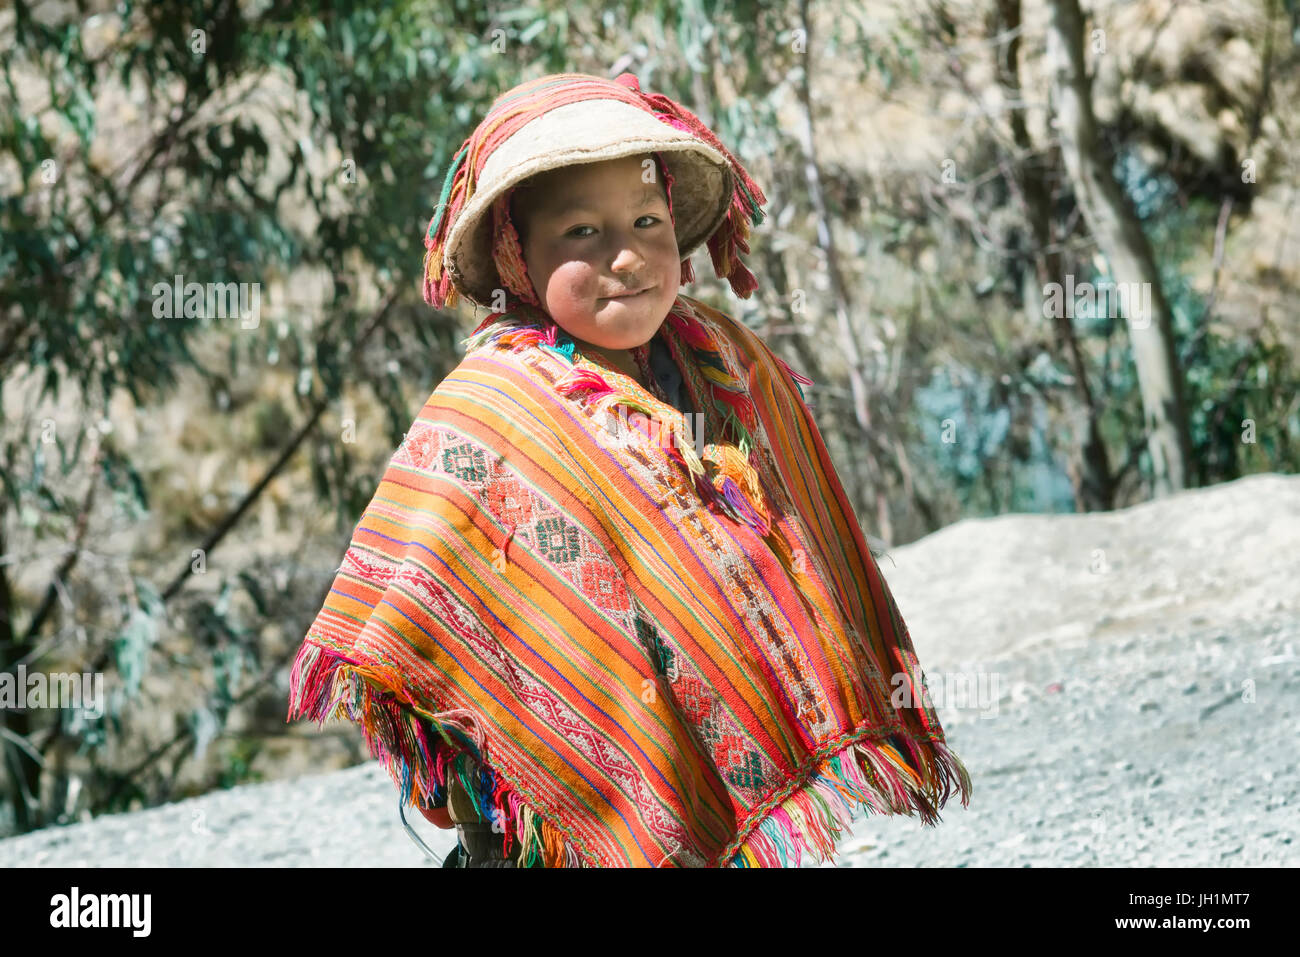 Smiling native peruvian boy wearing colorful handmade traditional poncho and a hat. October 21, 2012 - Patacancha, Cusco, Peru Stock Photo